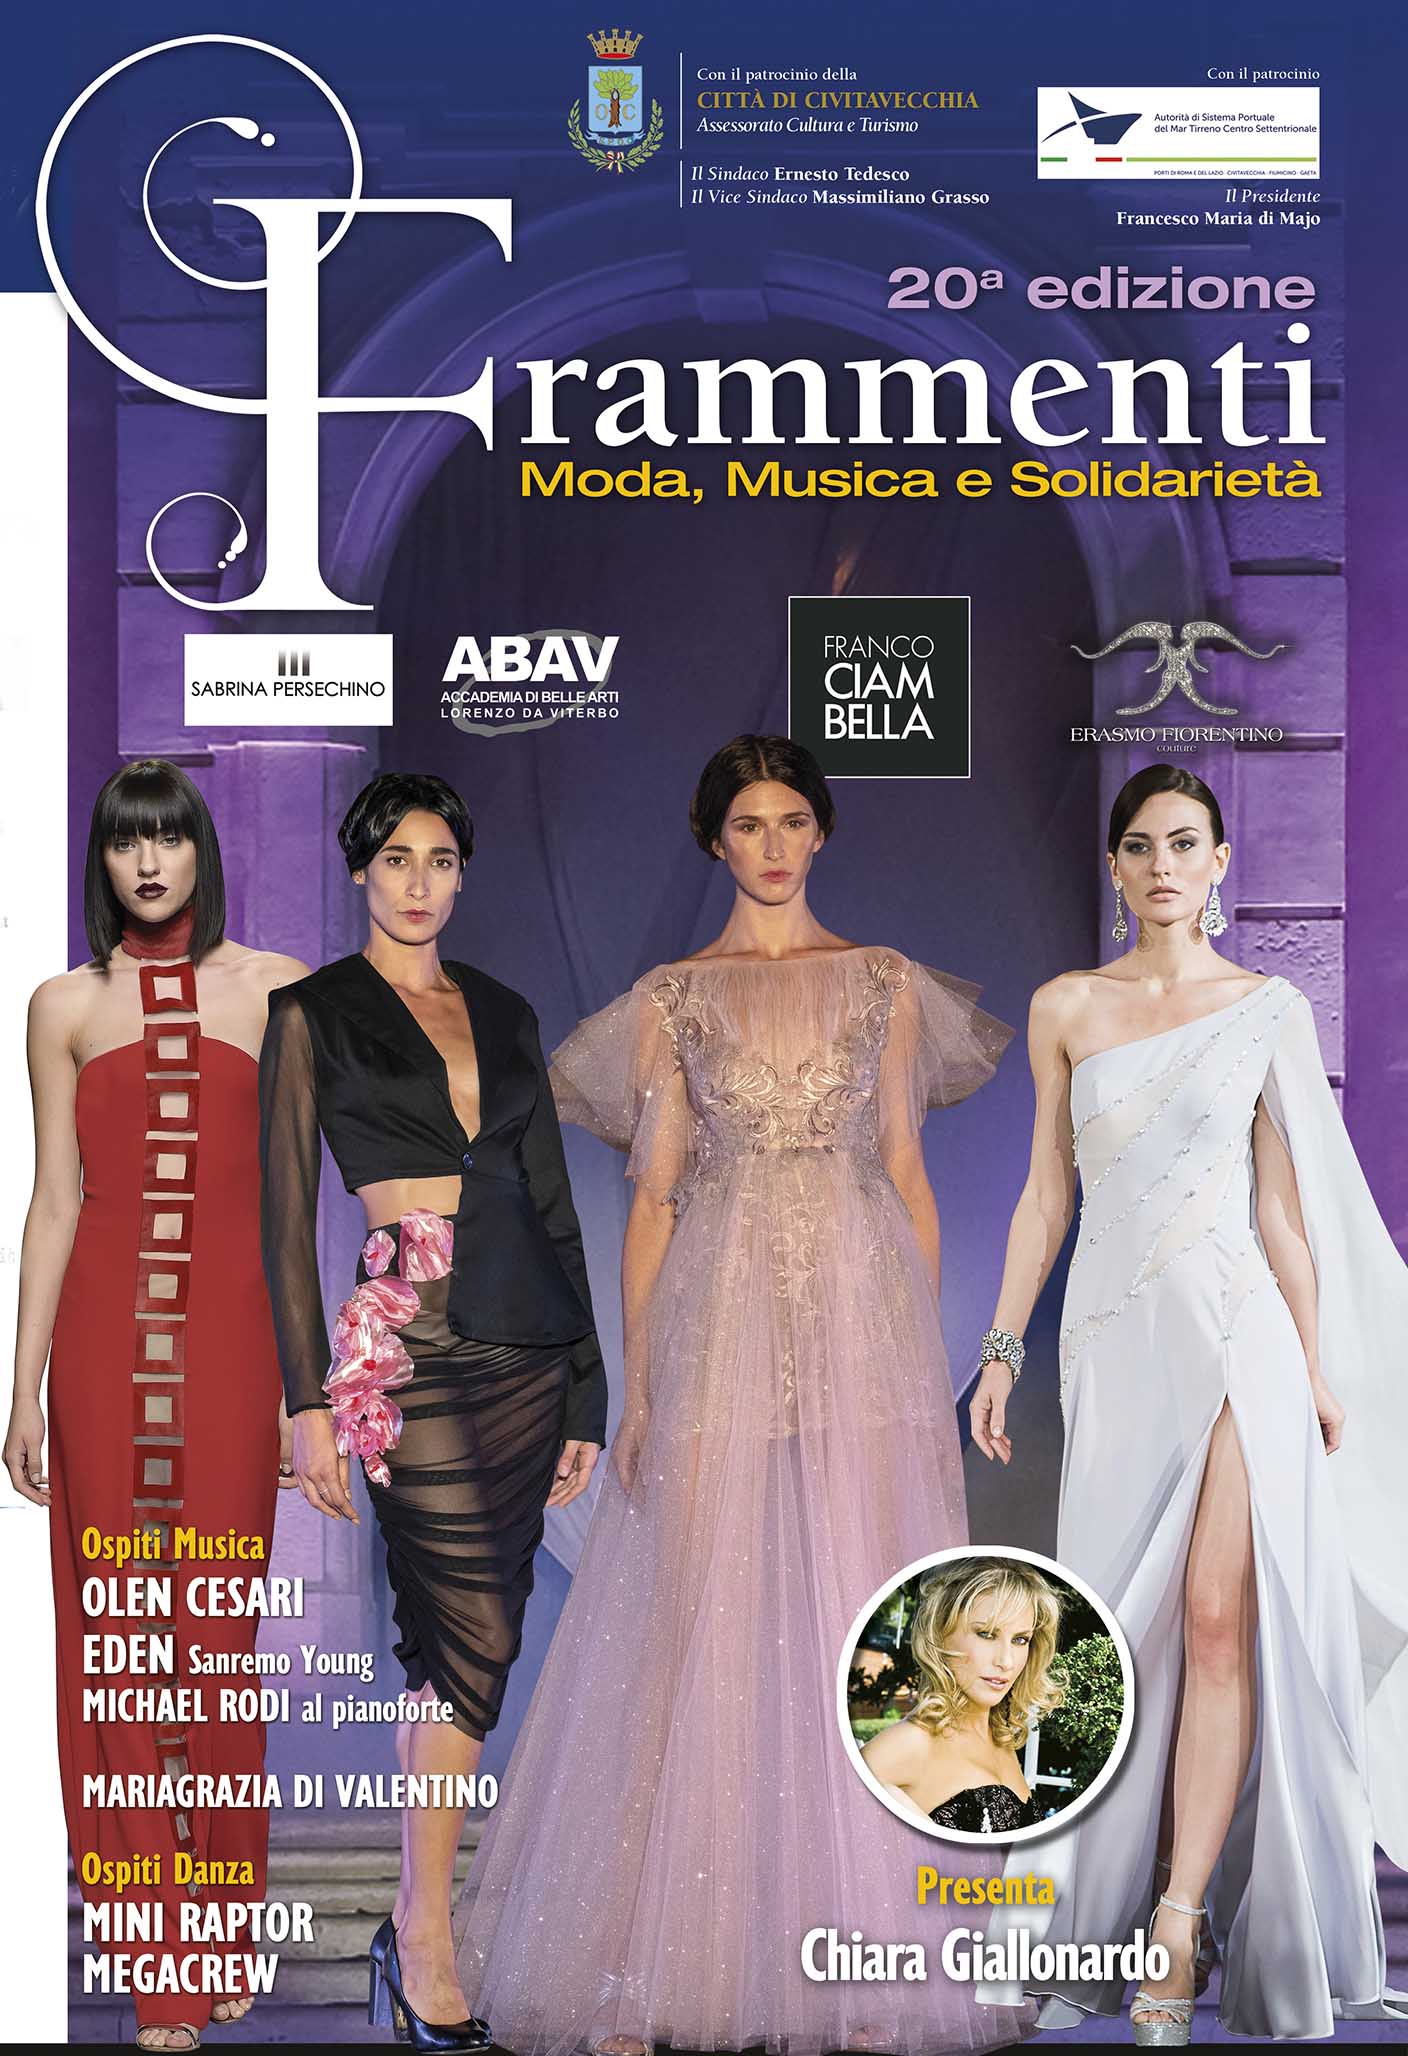 Frammenti 2019: official poster of the event